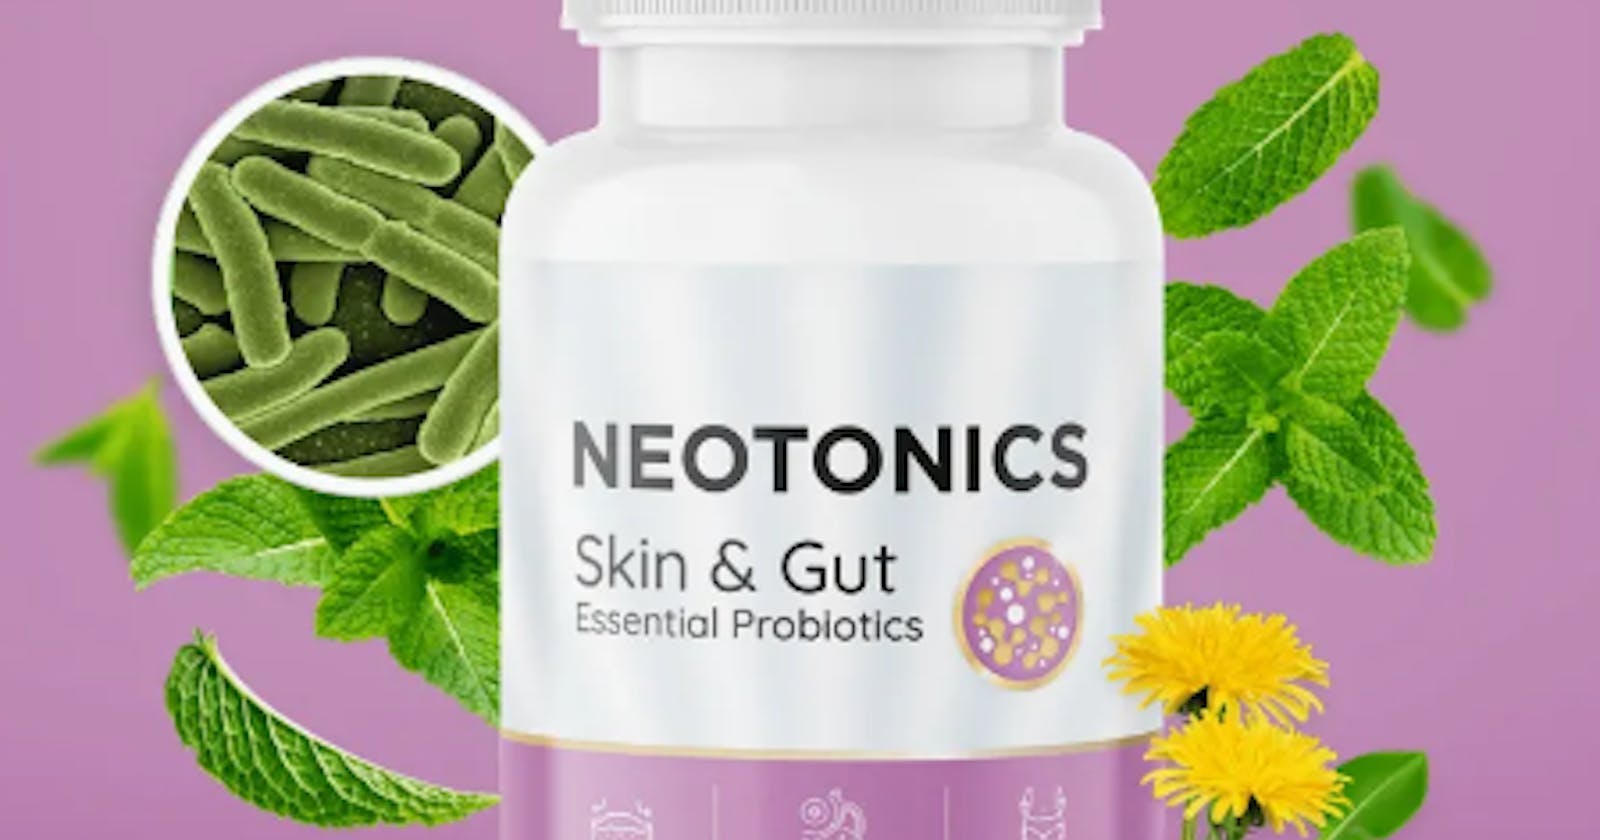 A Step-by-Step Guide to Improving Skin and Gut Health with NeoTonics